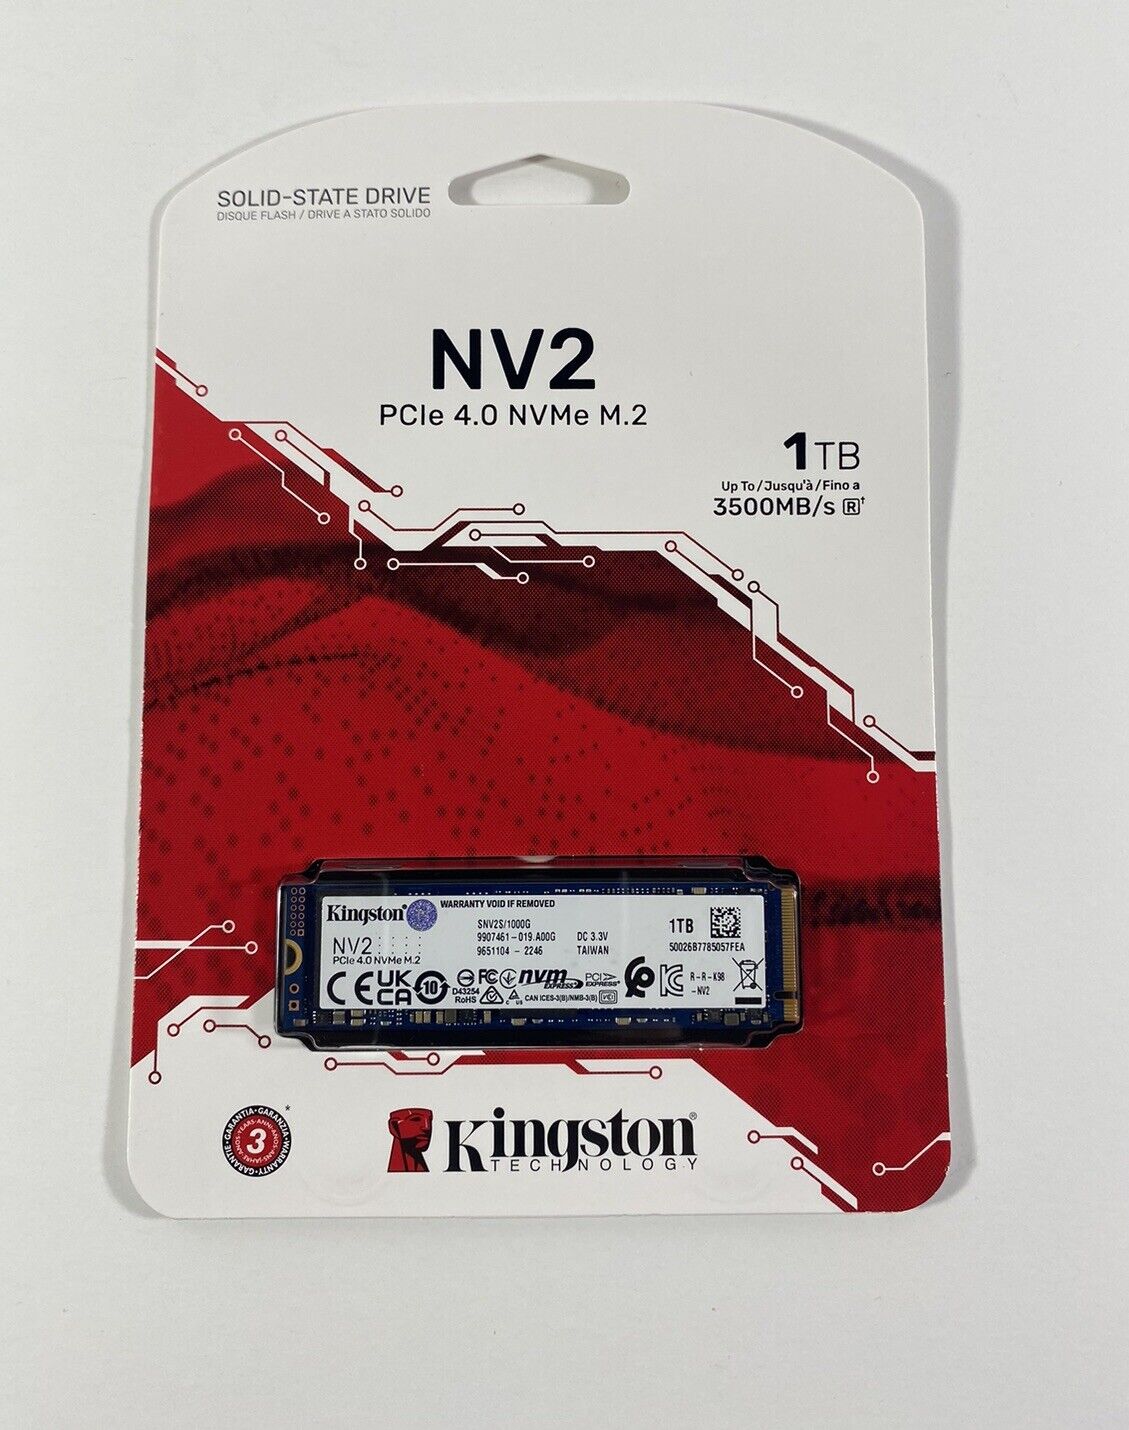 Kingston NV2 PCle 4.0 NVMe M.2 1TB Storage Solid State Drive Brand New